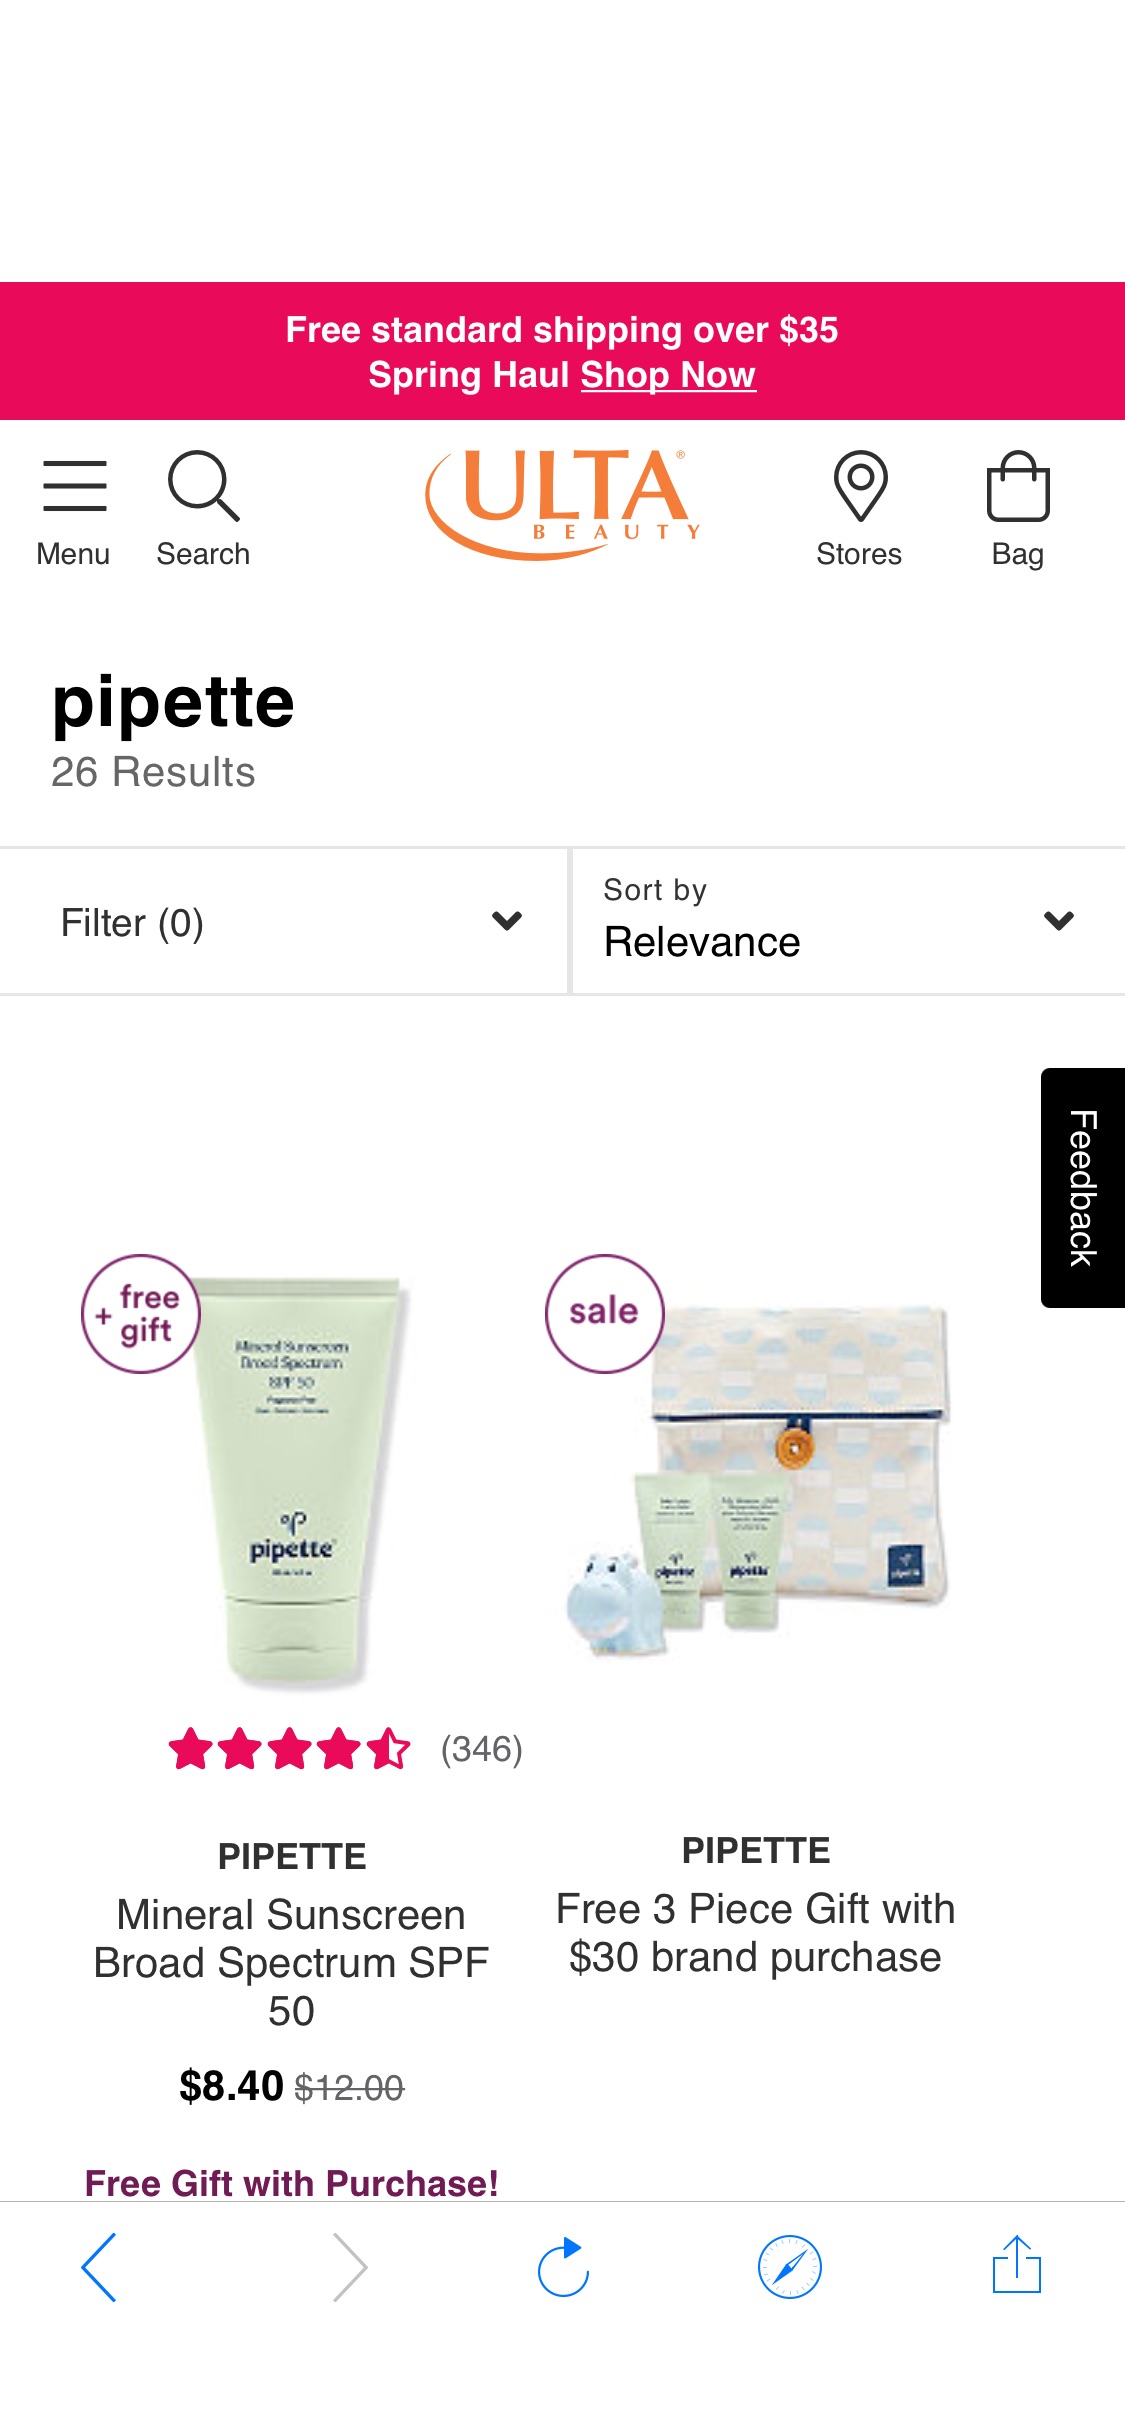 Pipette七折 礼品 Cosmetics, Fragrance, Skincare and Beauty Gifts | Ulta Beauty